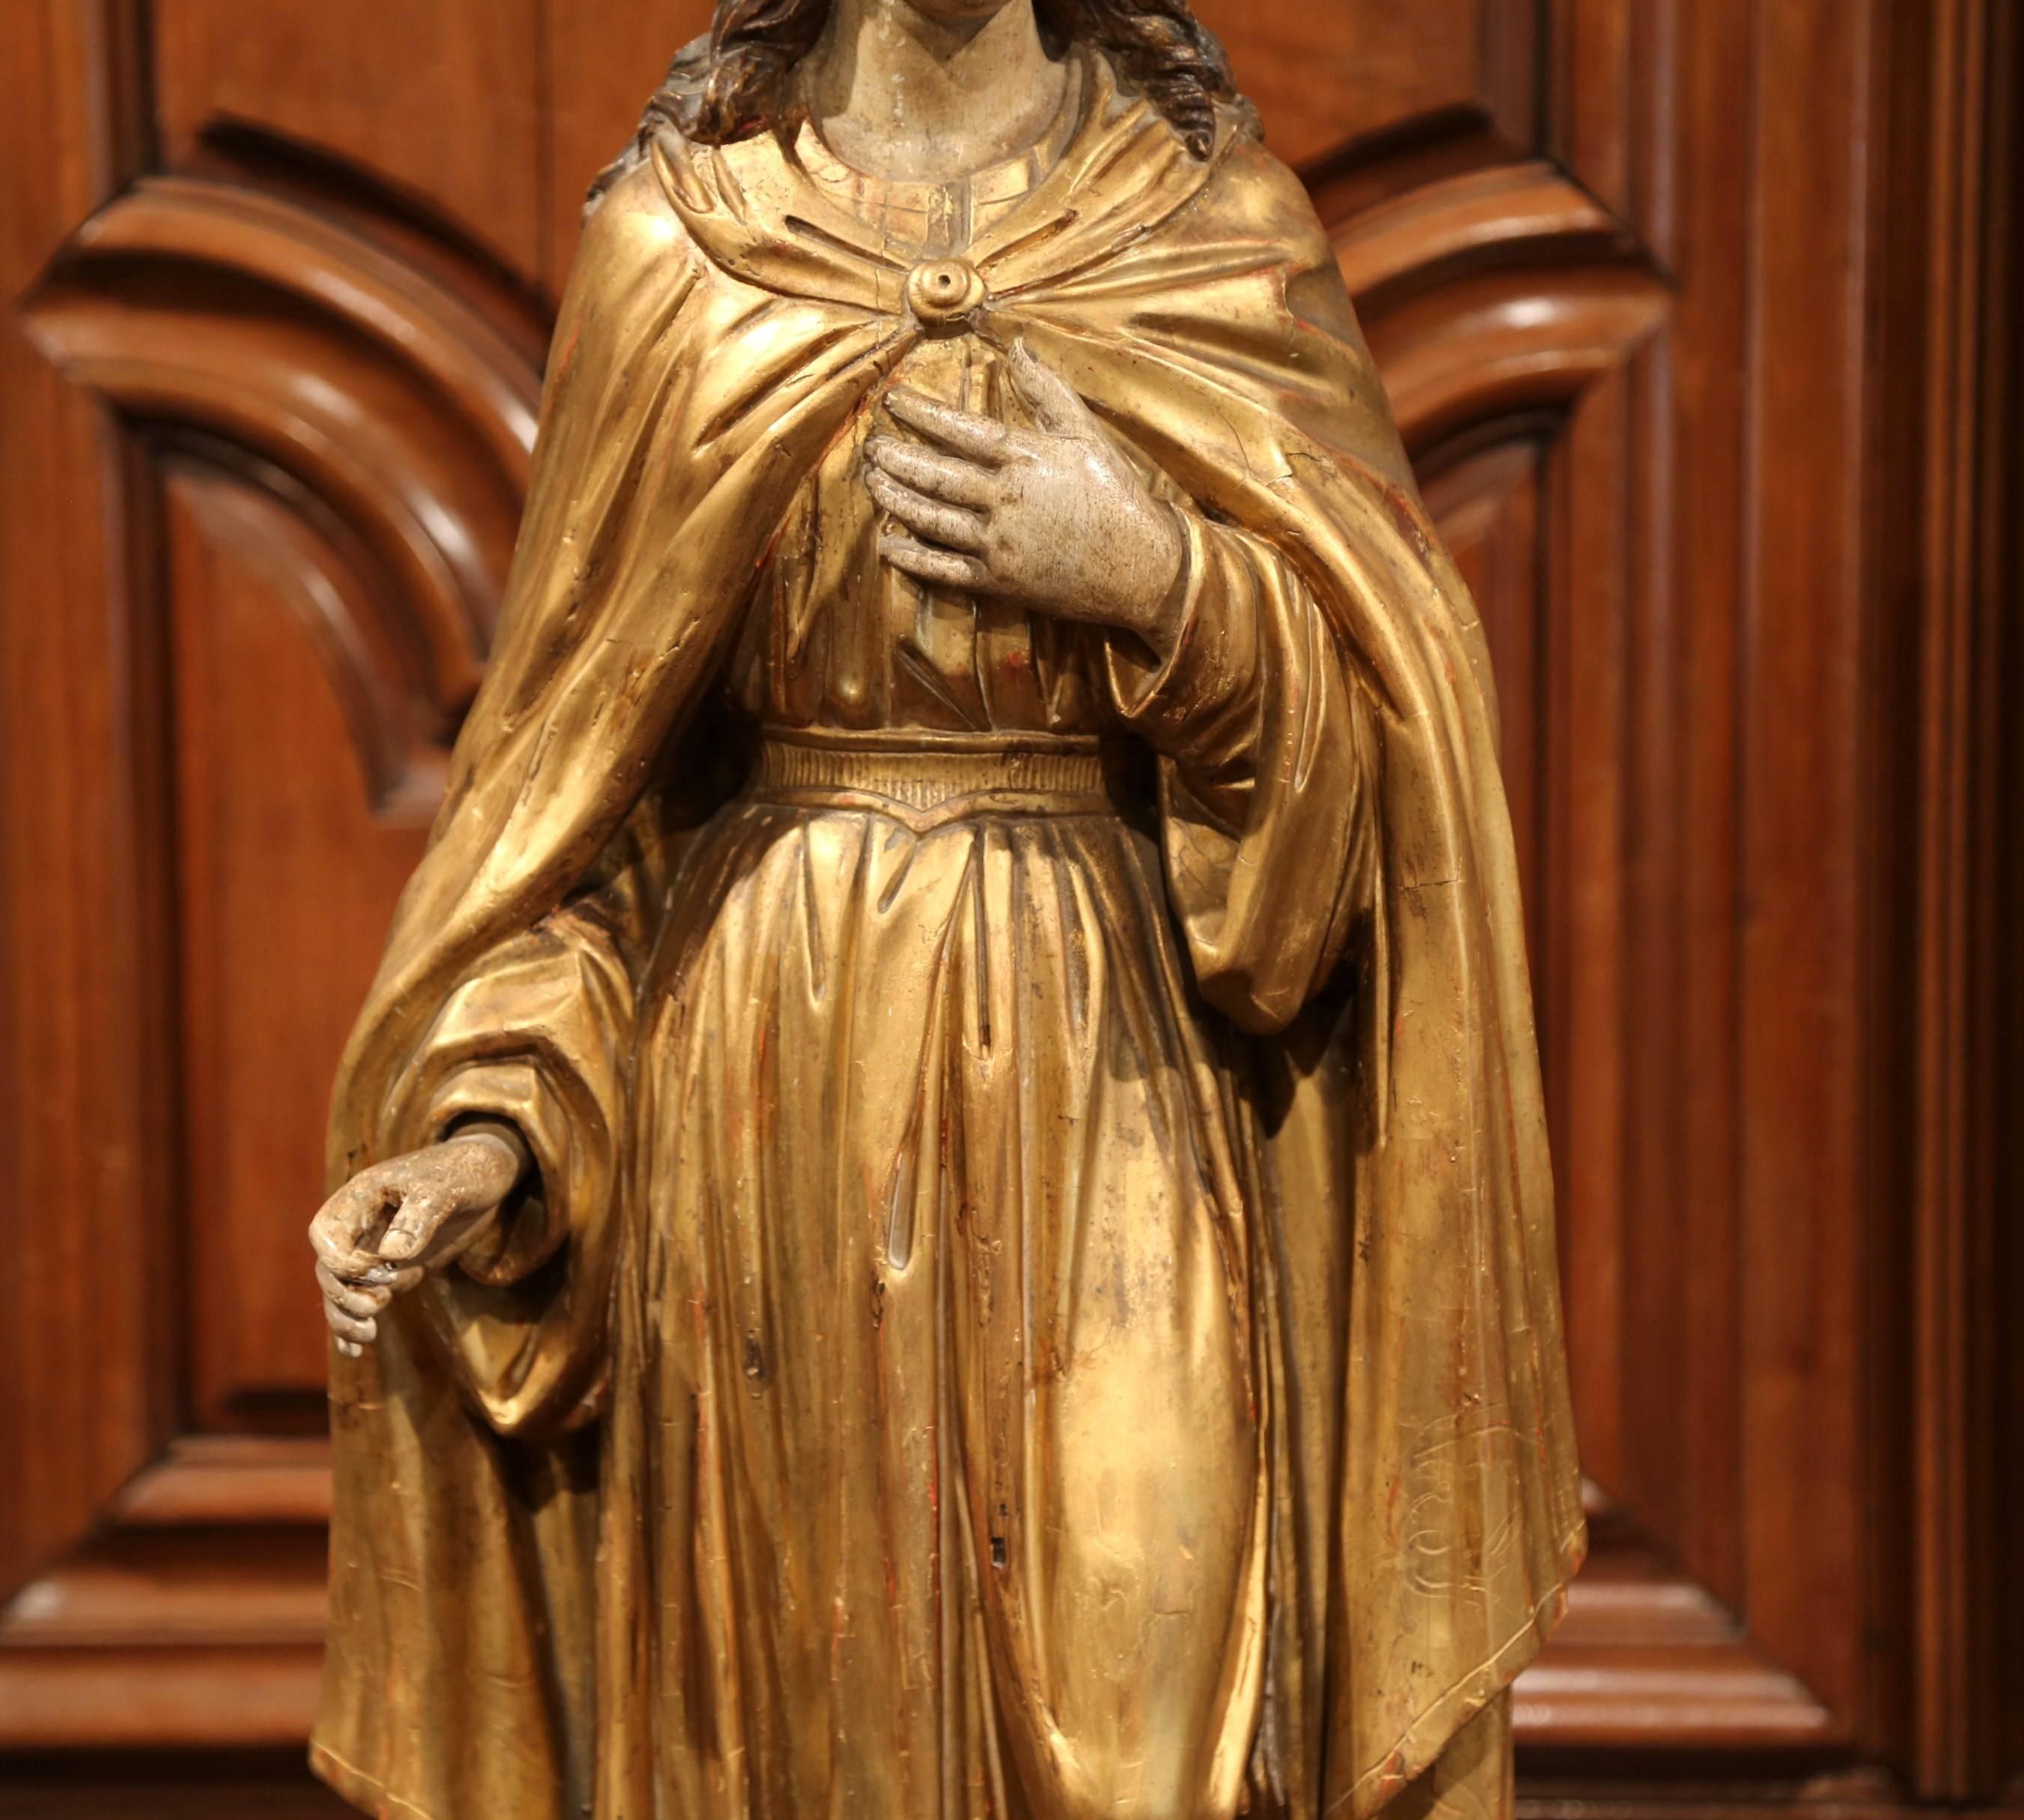 This beautiful, antique sculpture of the Virgin Mary was created in France, circa 1760. Embellished with the original luxurious gold leaf and polychrome finish, the traditional religious figure is beautifully ornate and has wonderful details